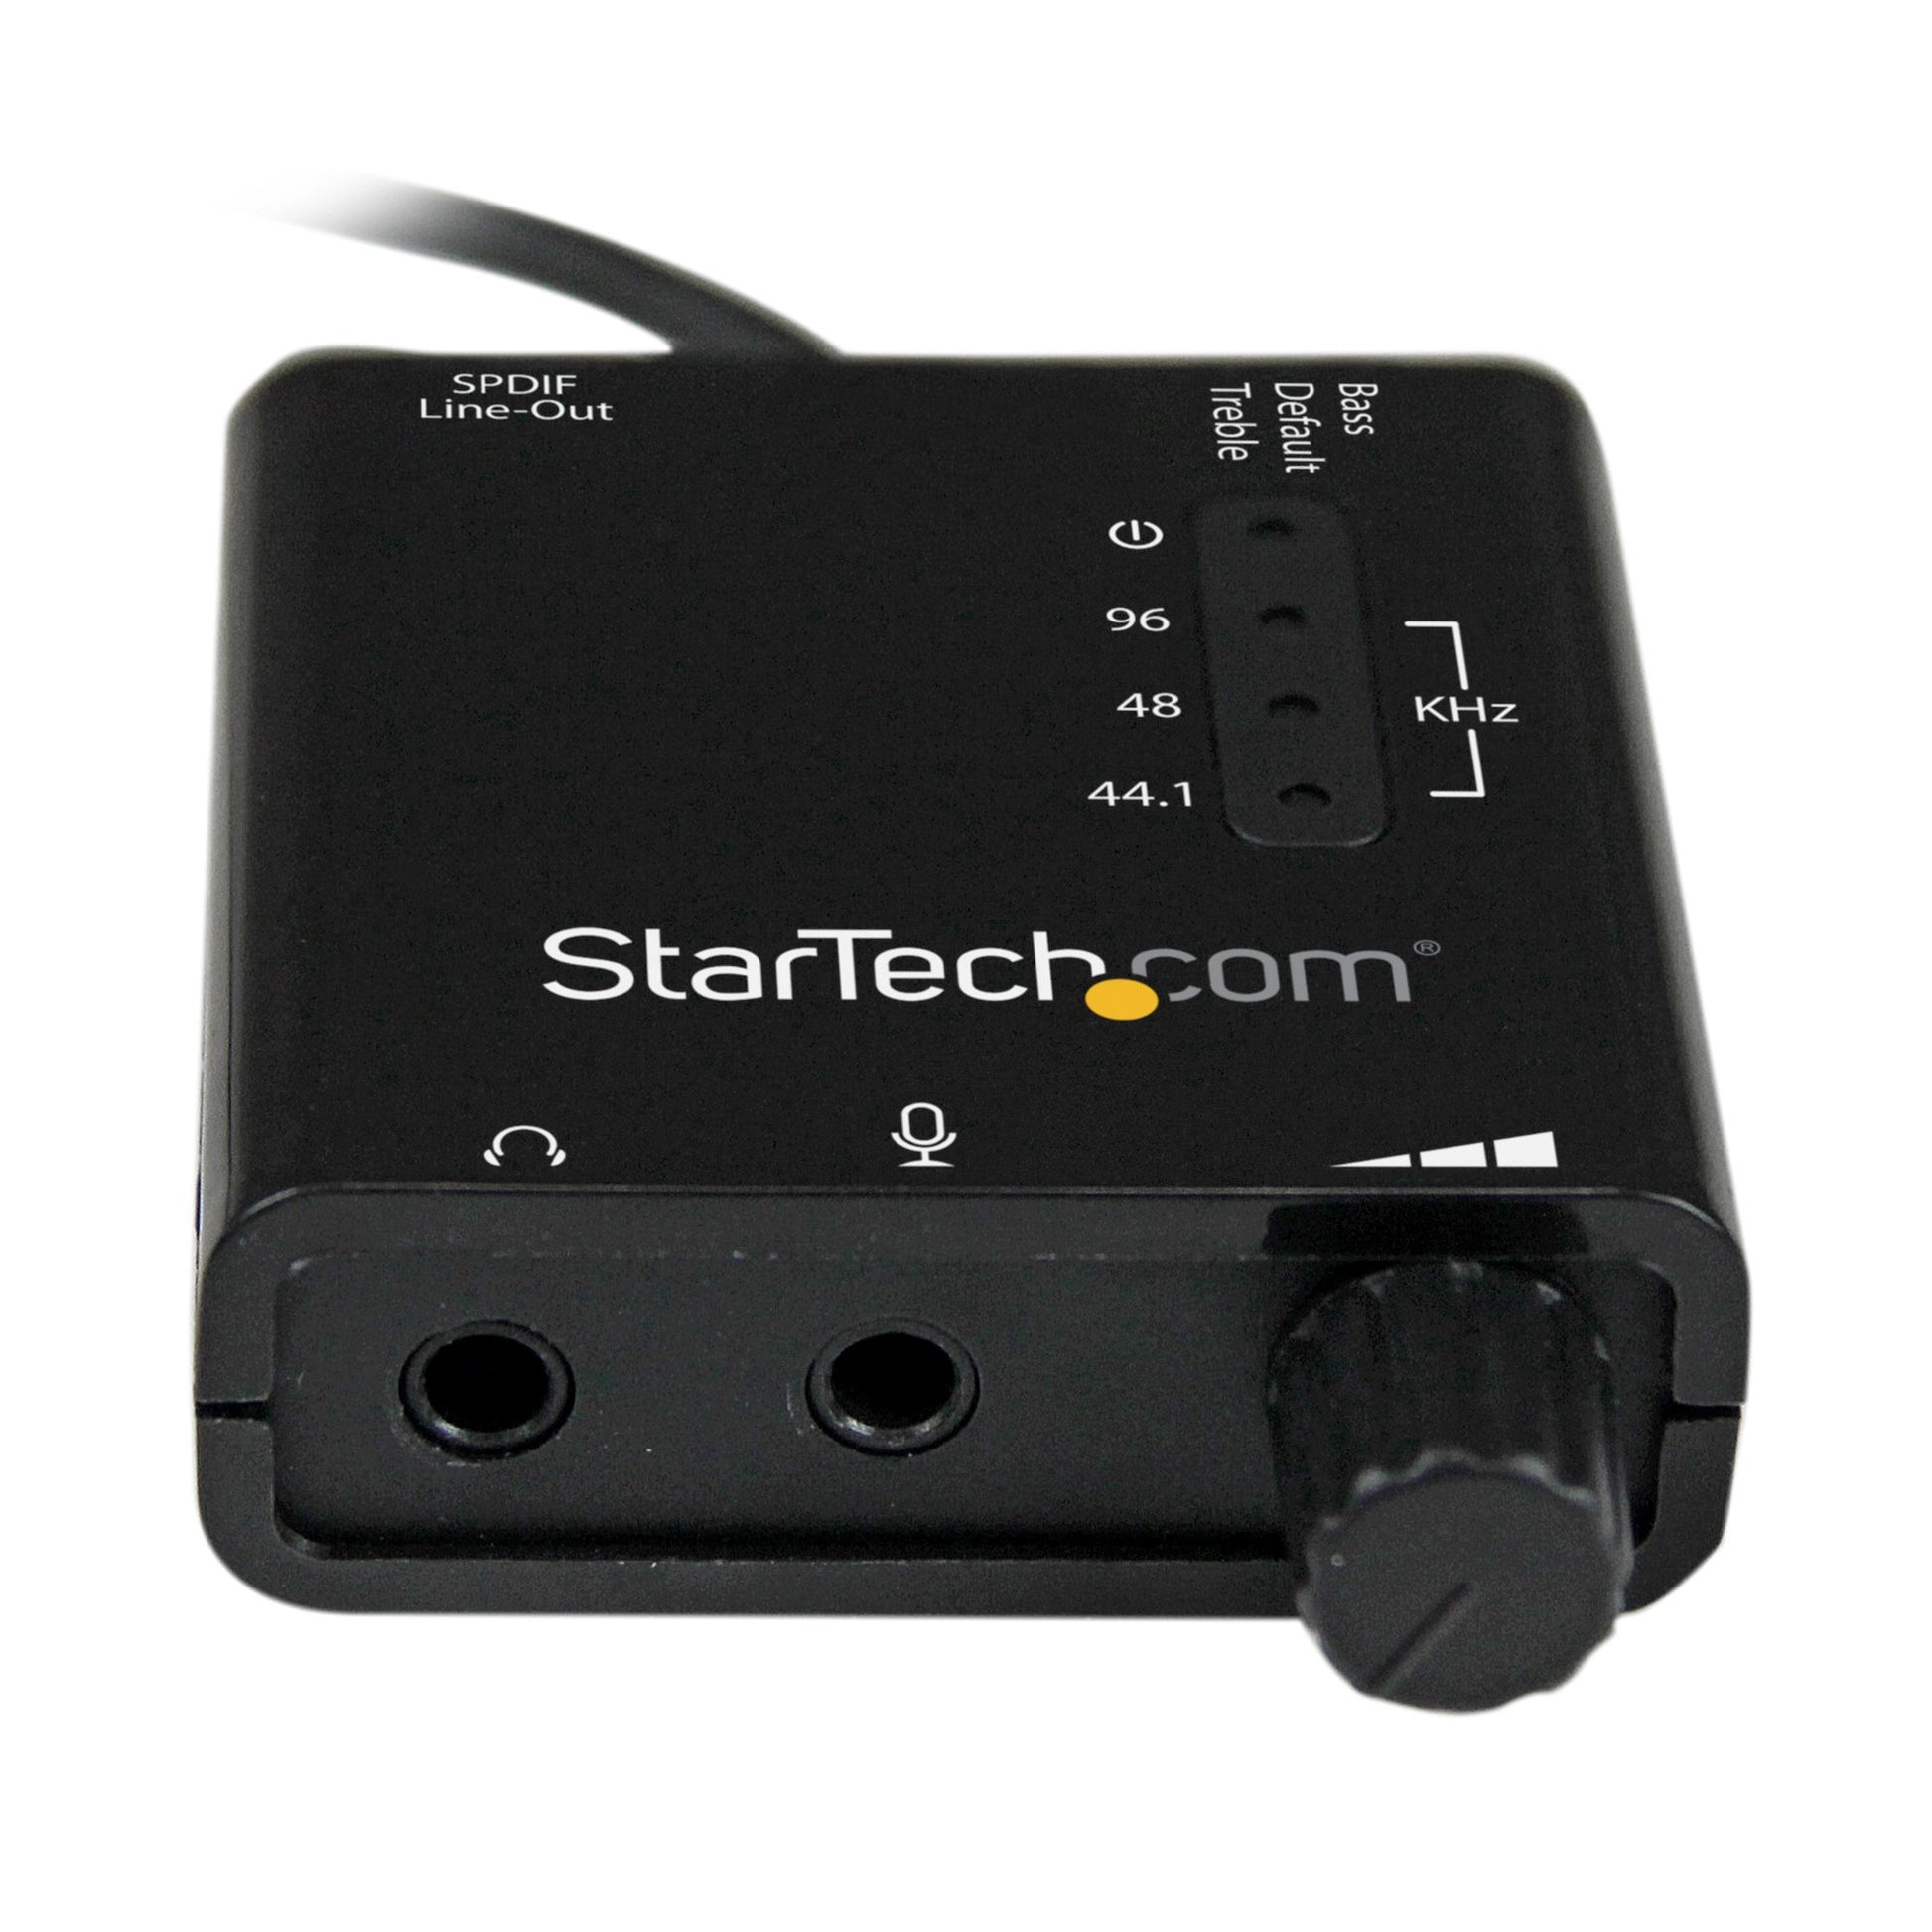 StarTech.com USB Stereo Audio Adapter External Sound Card with SPDIF Digital Audio and Stereo Mic-2